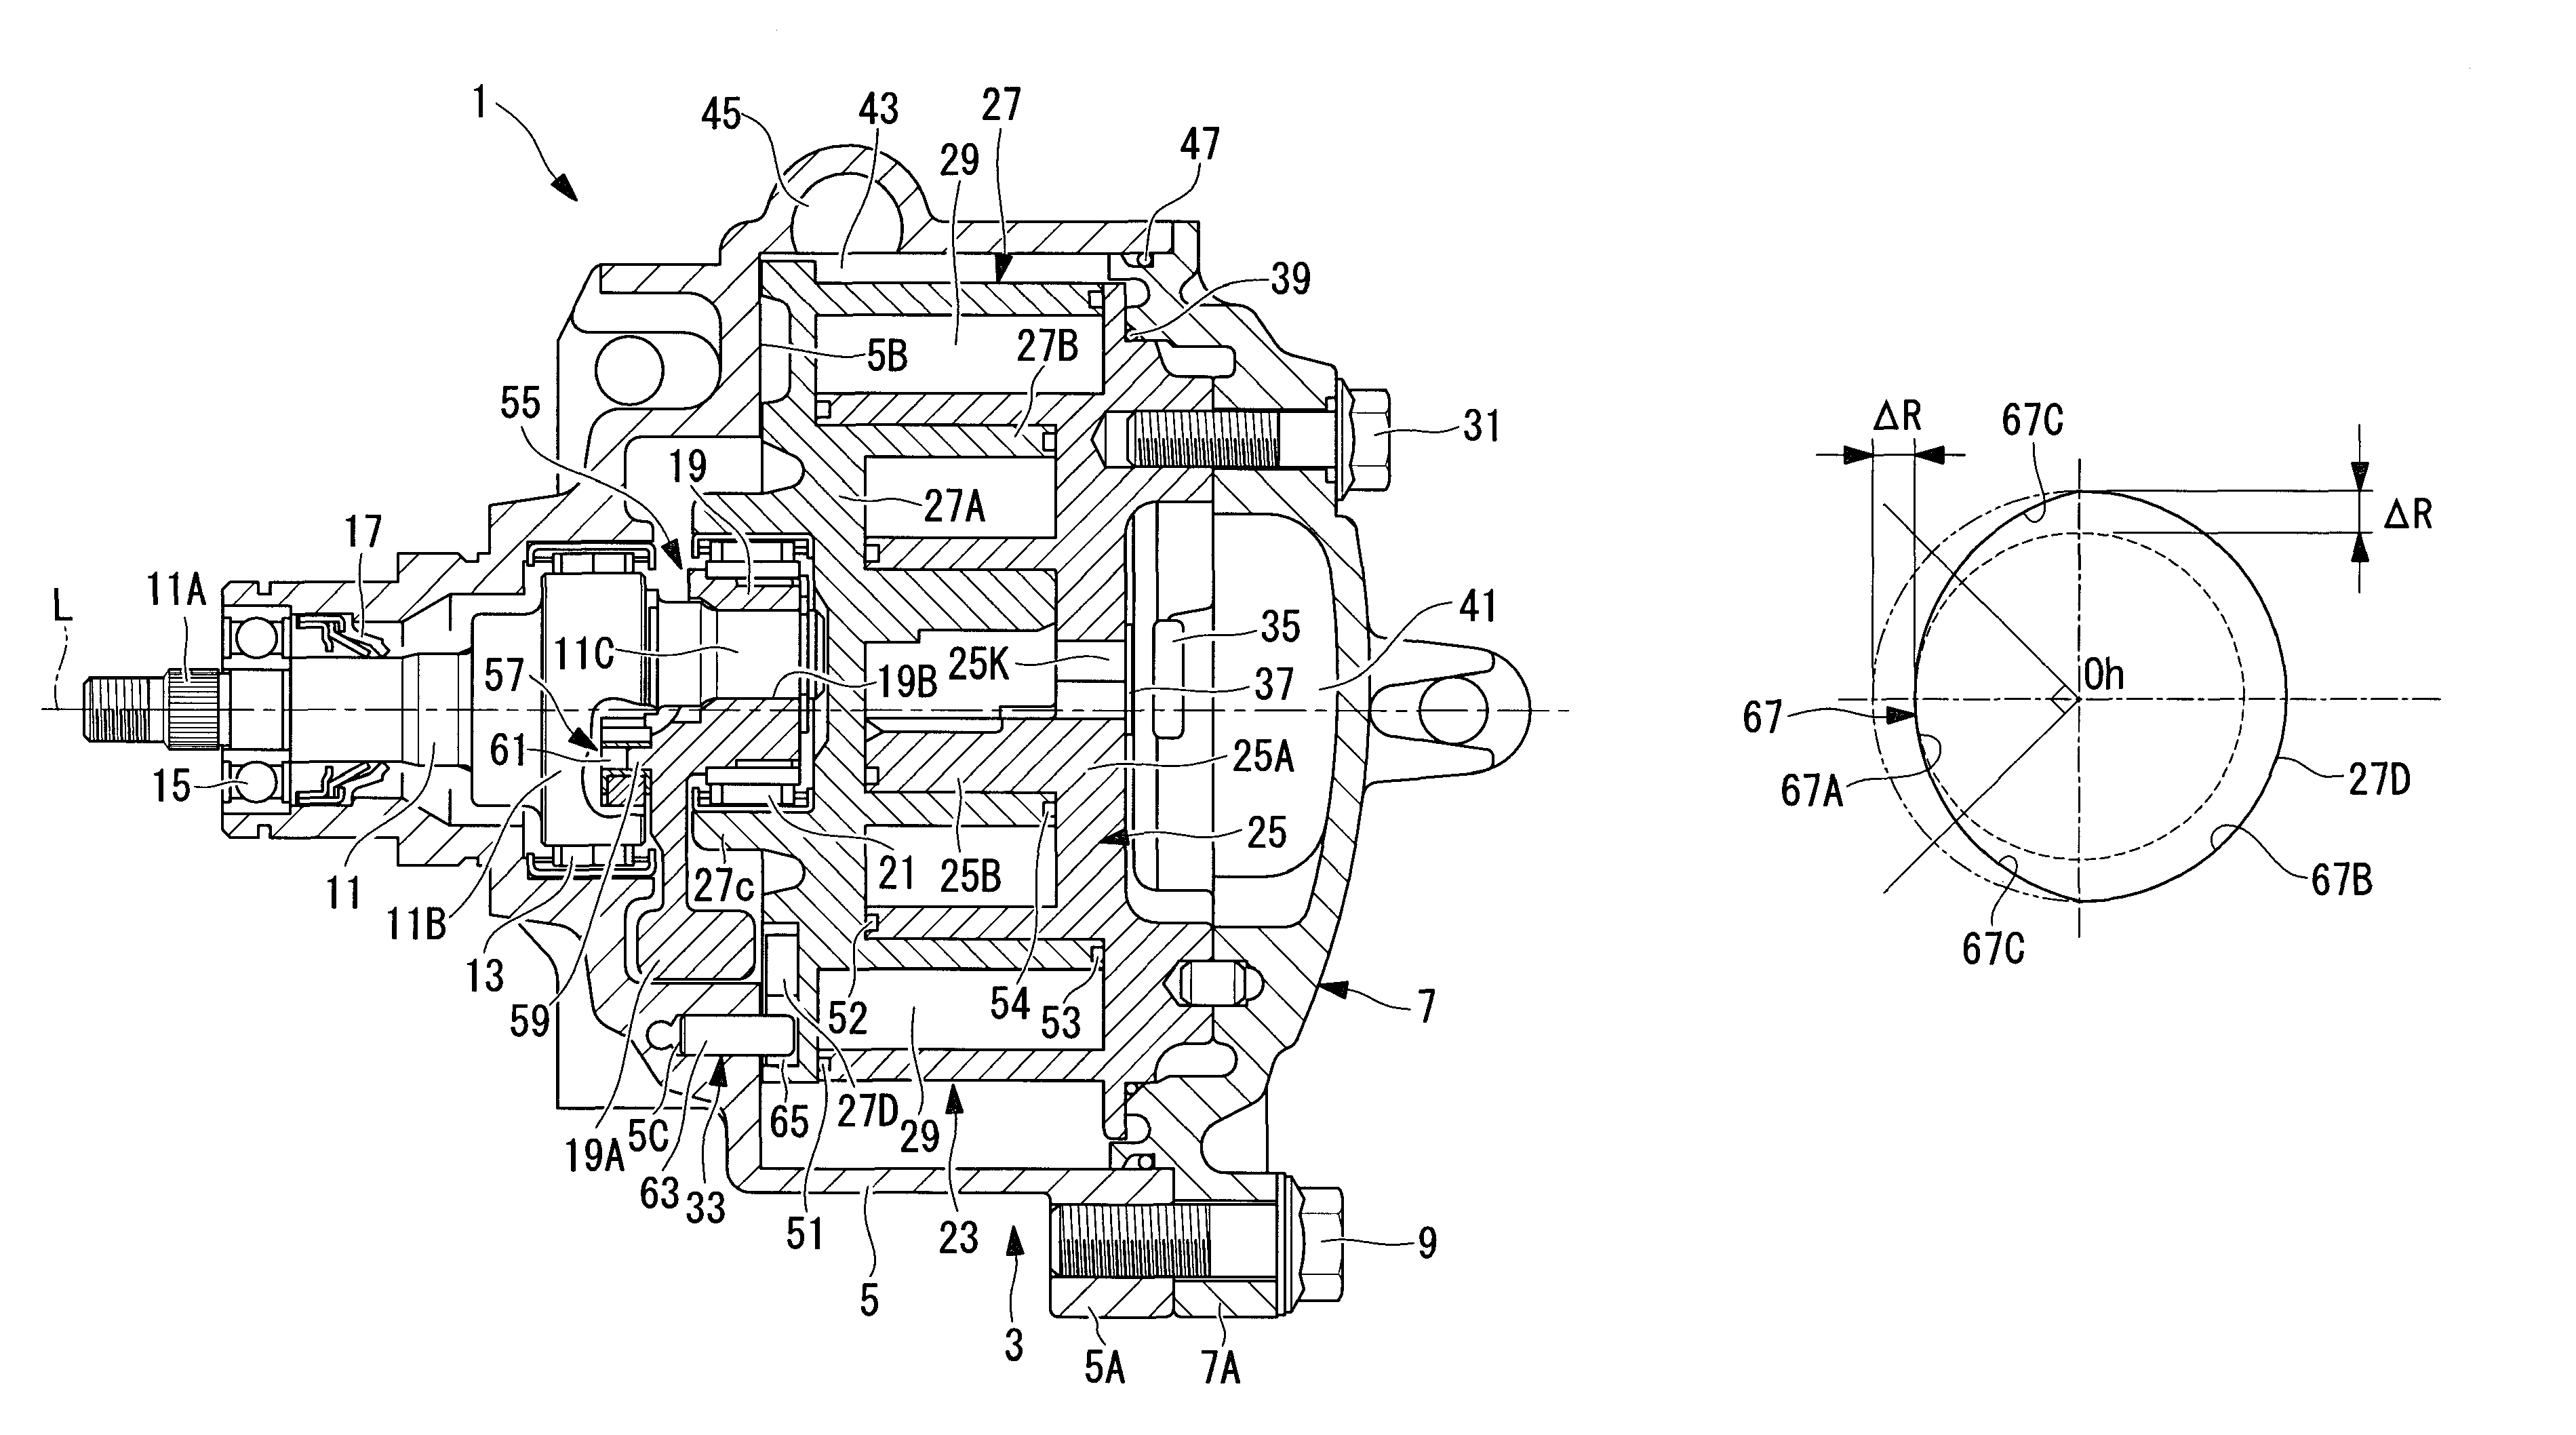 Scroll compressor with improved rotation prevention mechanism